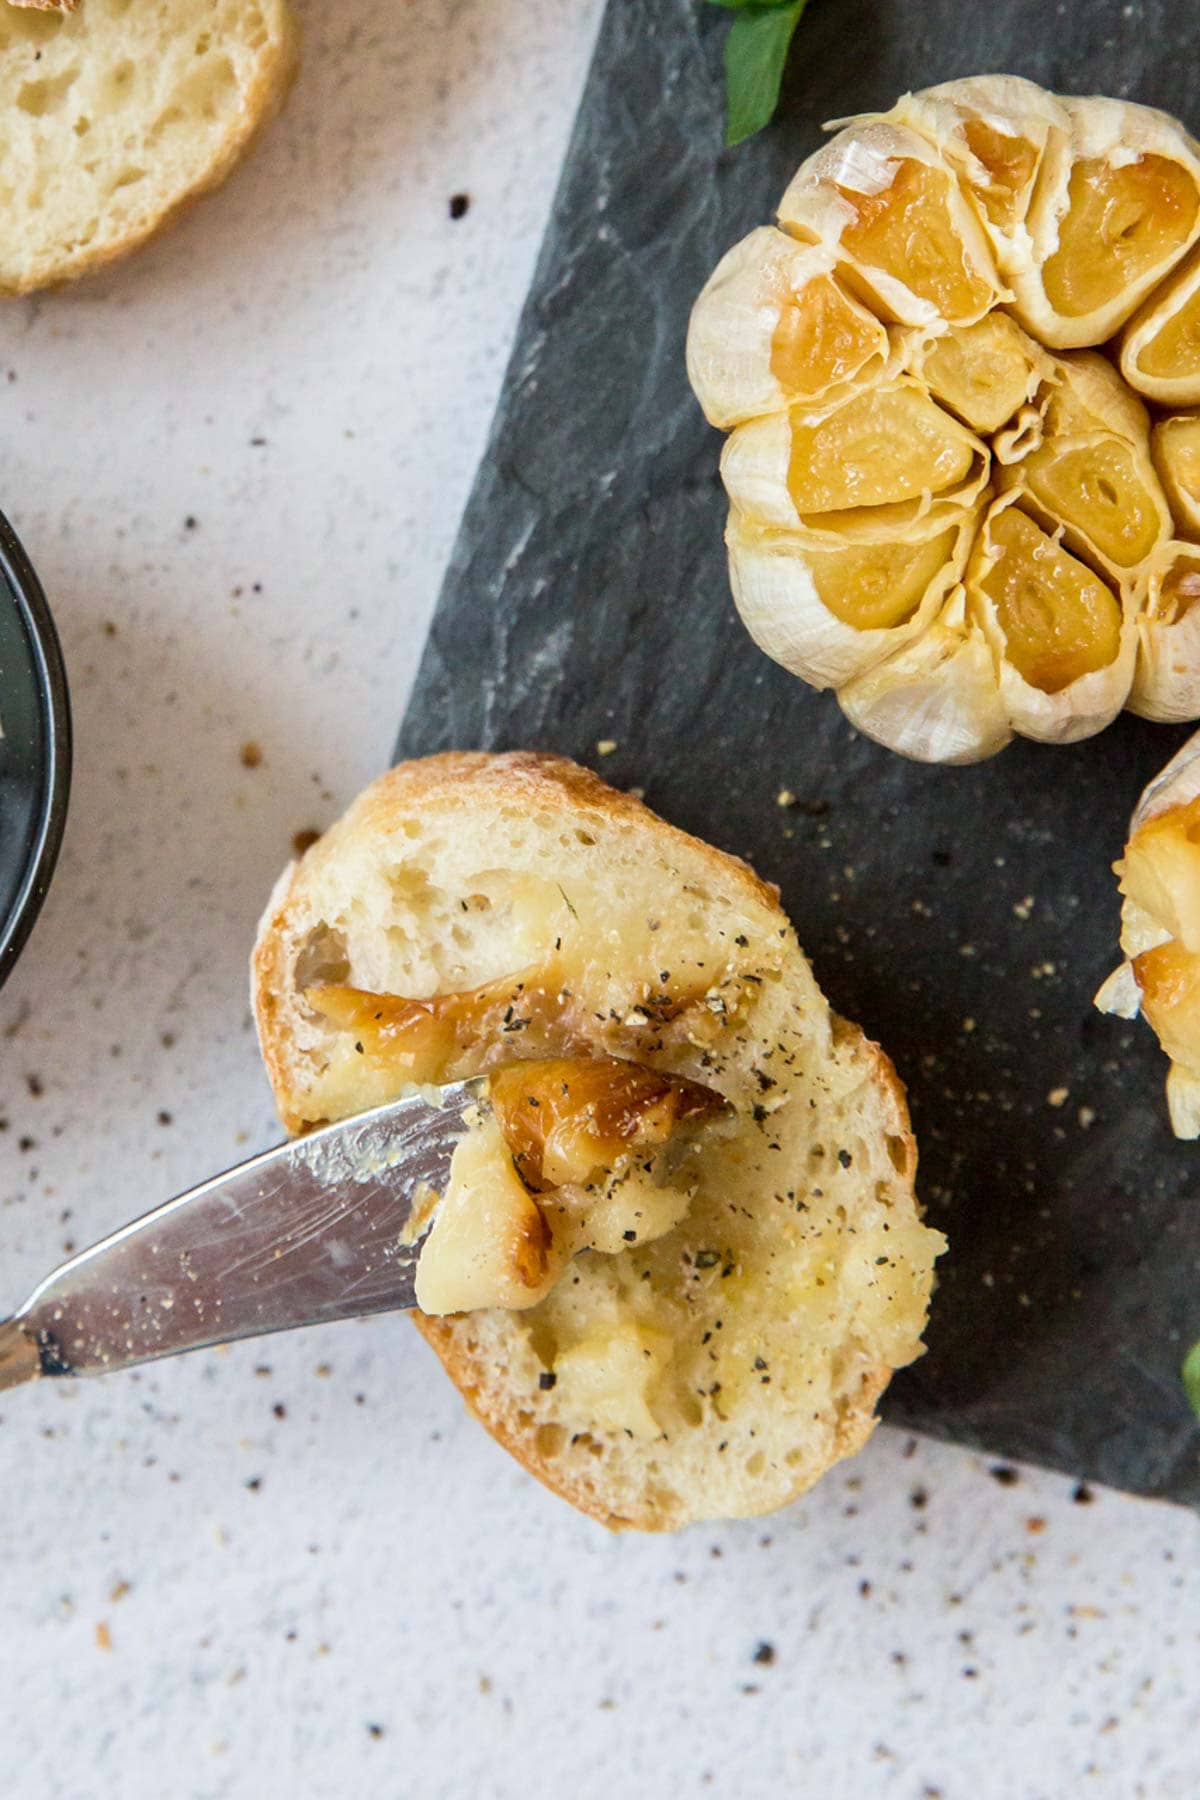 Mashed roasted garlic spread onto a slice of baguette with black pepper.